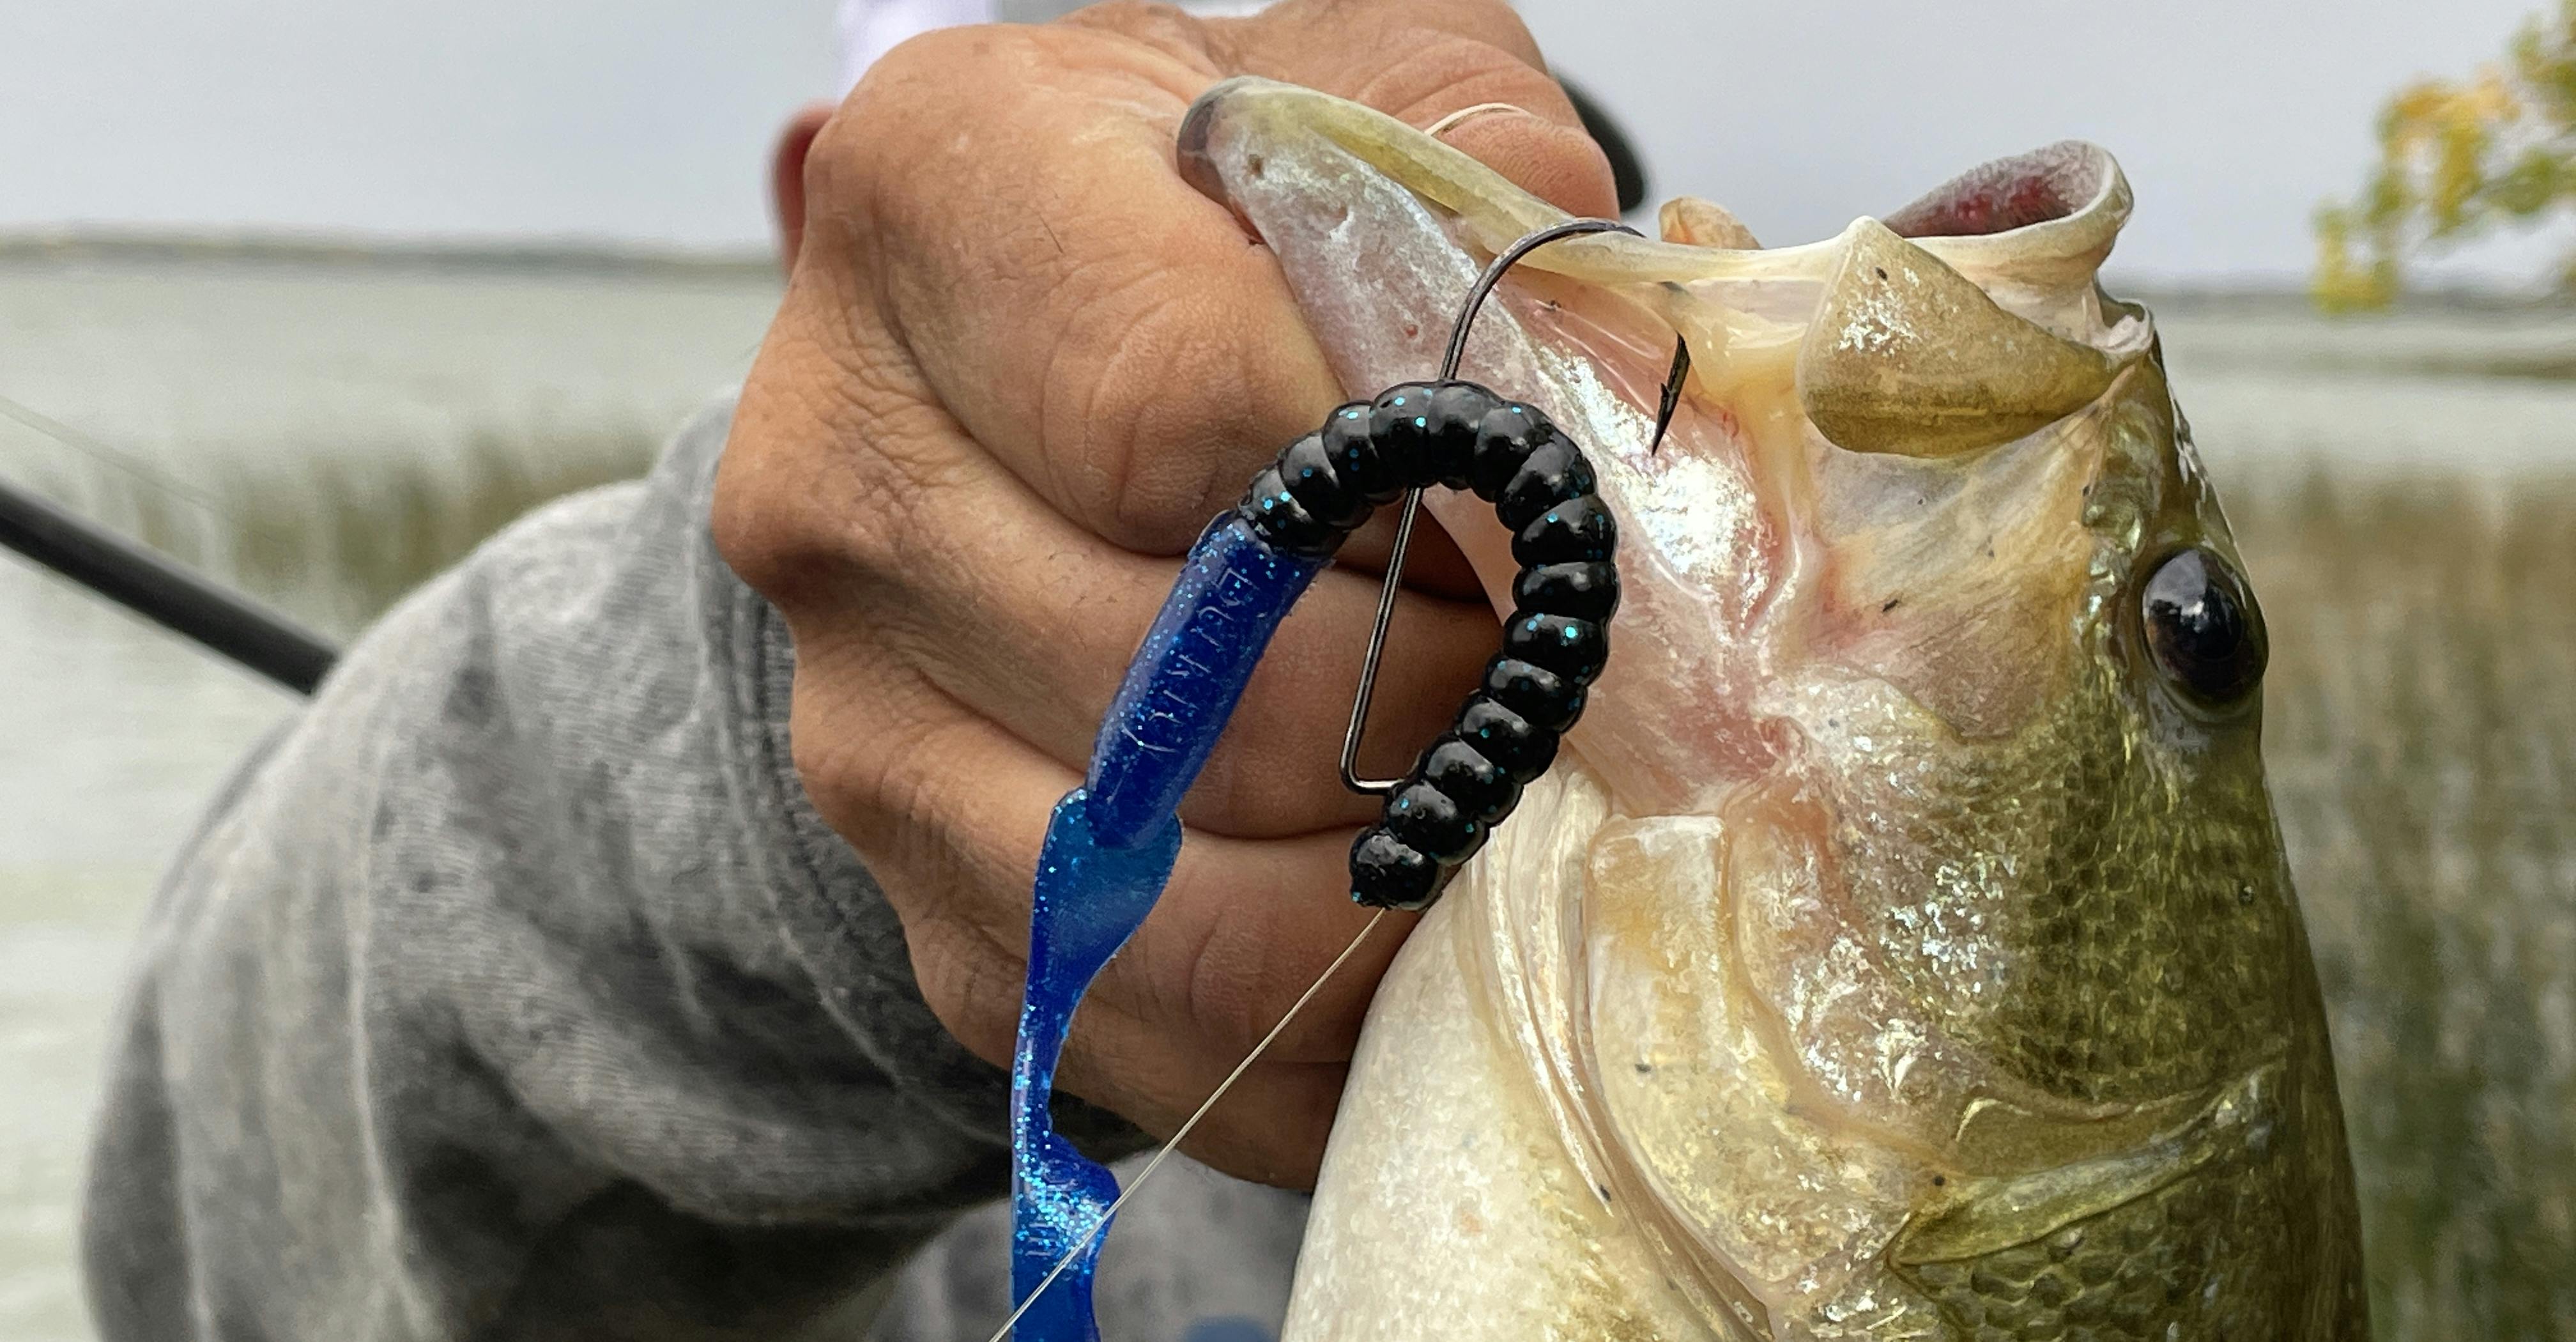 How to Rig and Fish Tube Baits - One of the Most Versatile